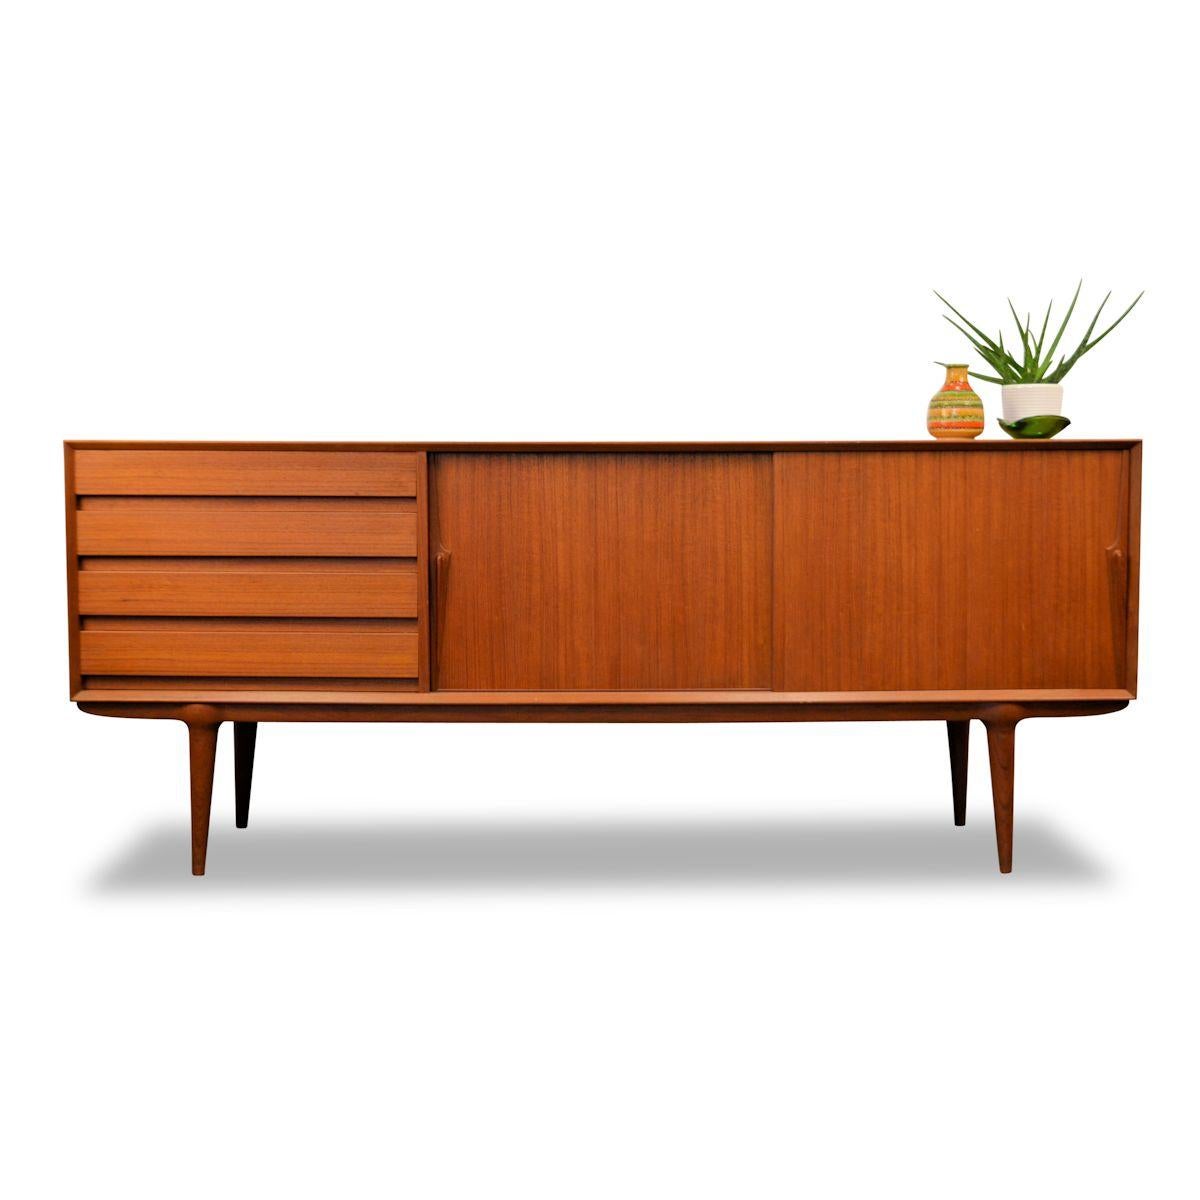 Danish modern teak model 18 sideboard designed by Gunni Omann for Omann Jun Møbelfabrik. This family owned business is still very much alive today and is headed by the third generation of Omanns. Many of the company’s designs were designed by family